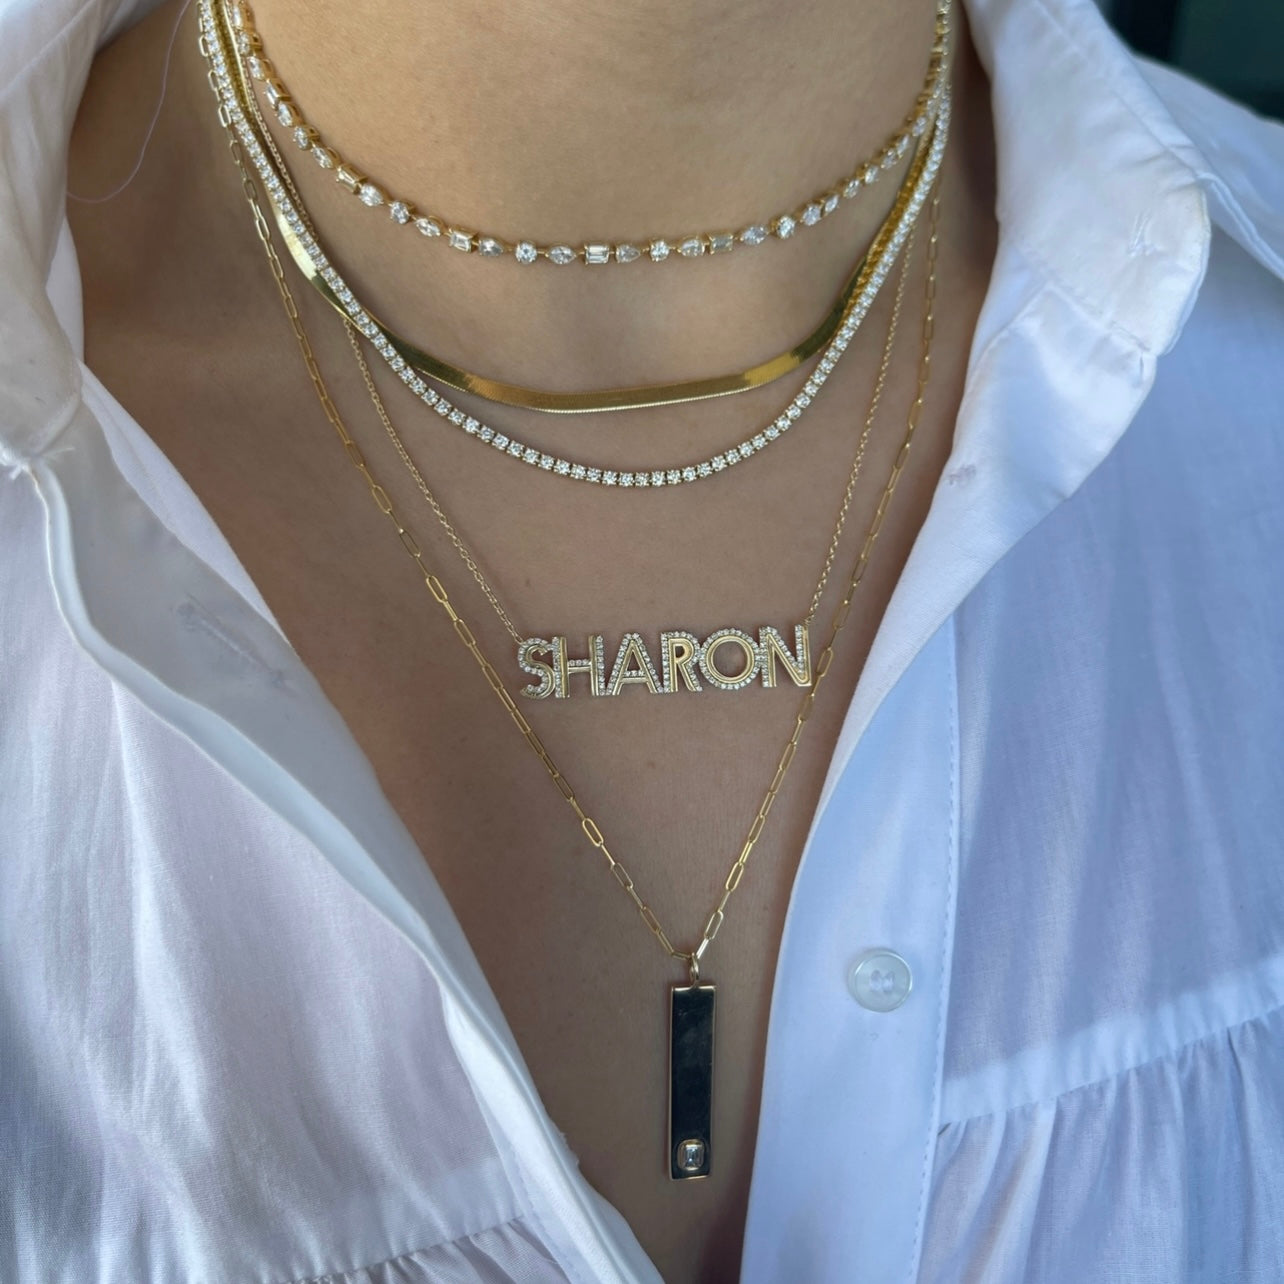 Fluted Finish + Diamond Detail Name Necklace